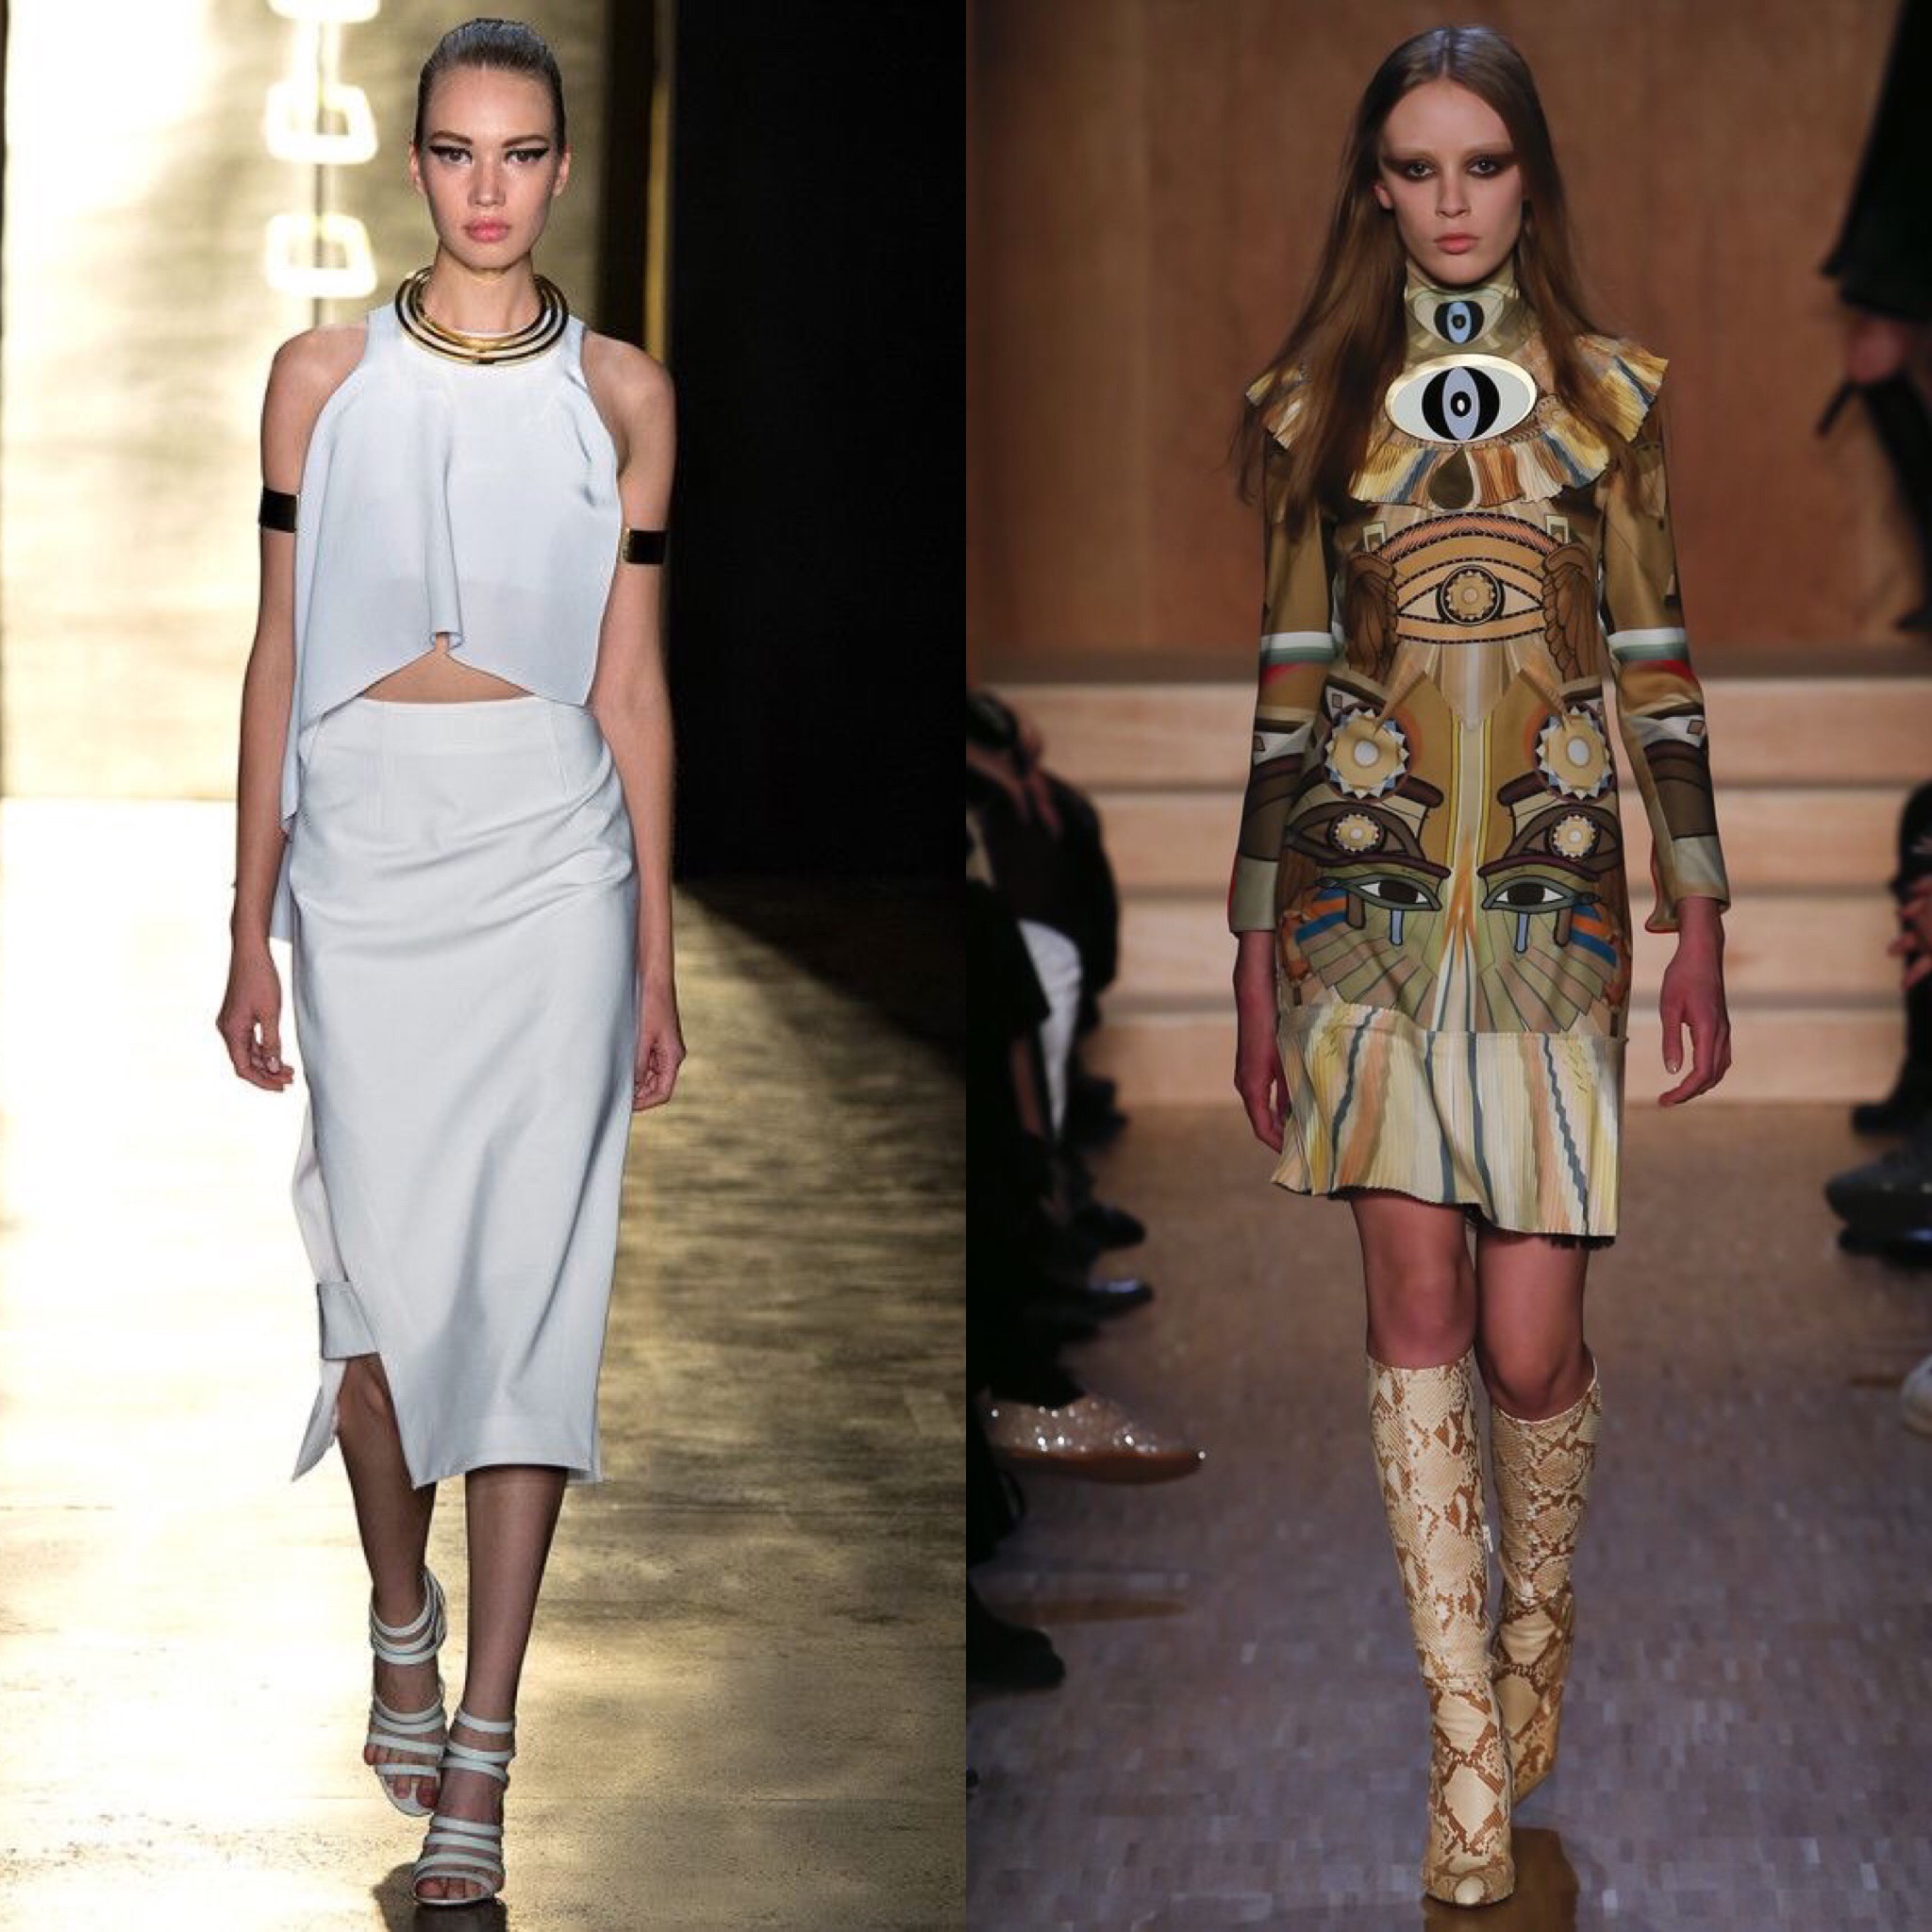 Modern Clothes Designer Inspired By Ancient Greece - fasrmod